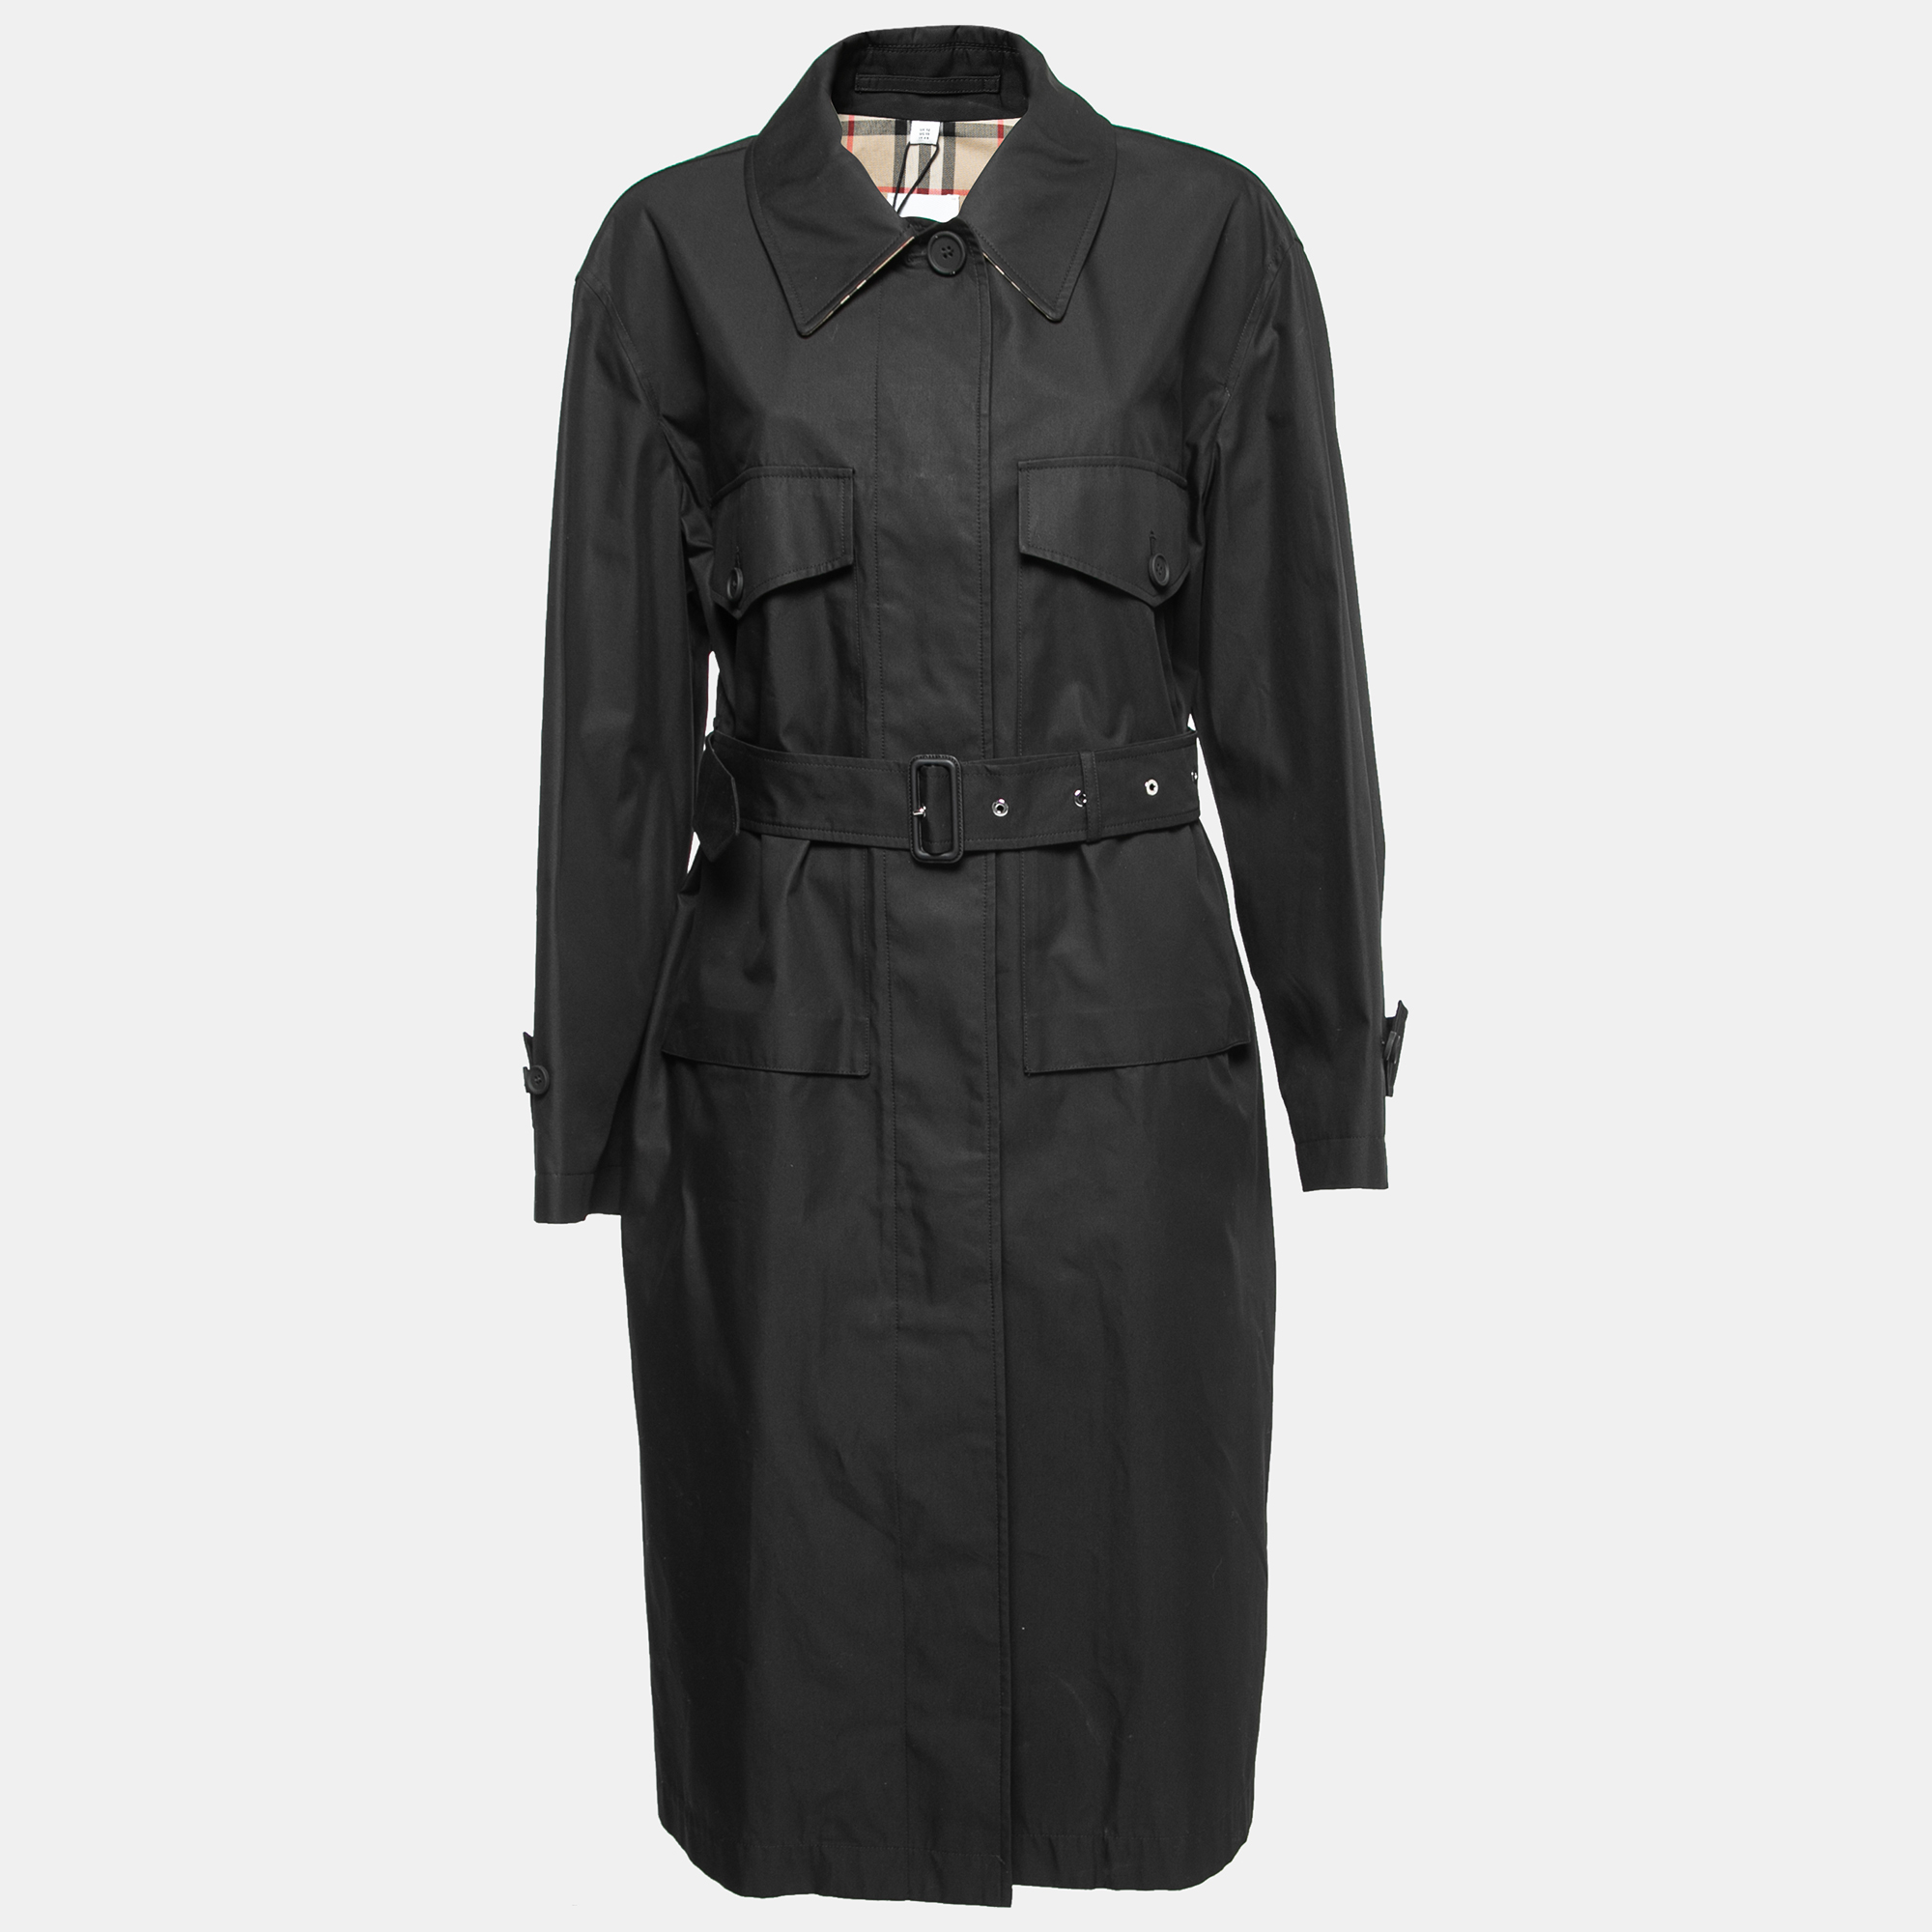 Pre-owned Burberry Black Gabardine Swingate Belted Trench Coat M